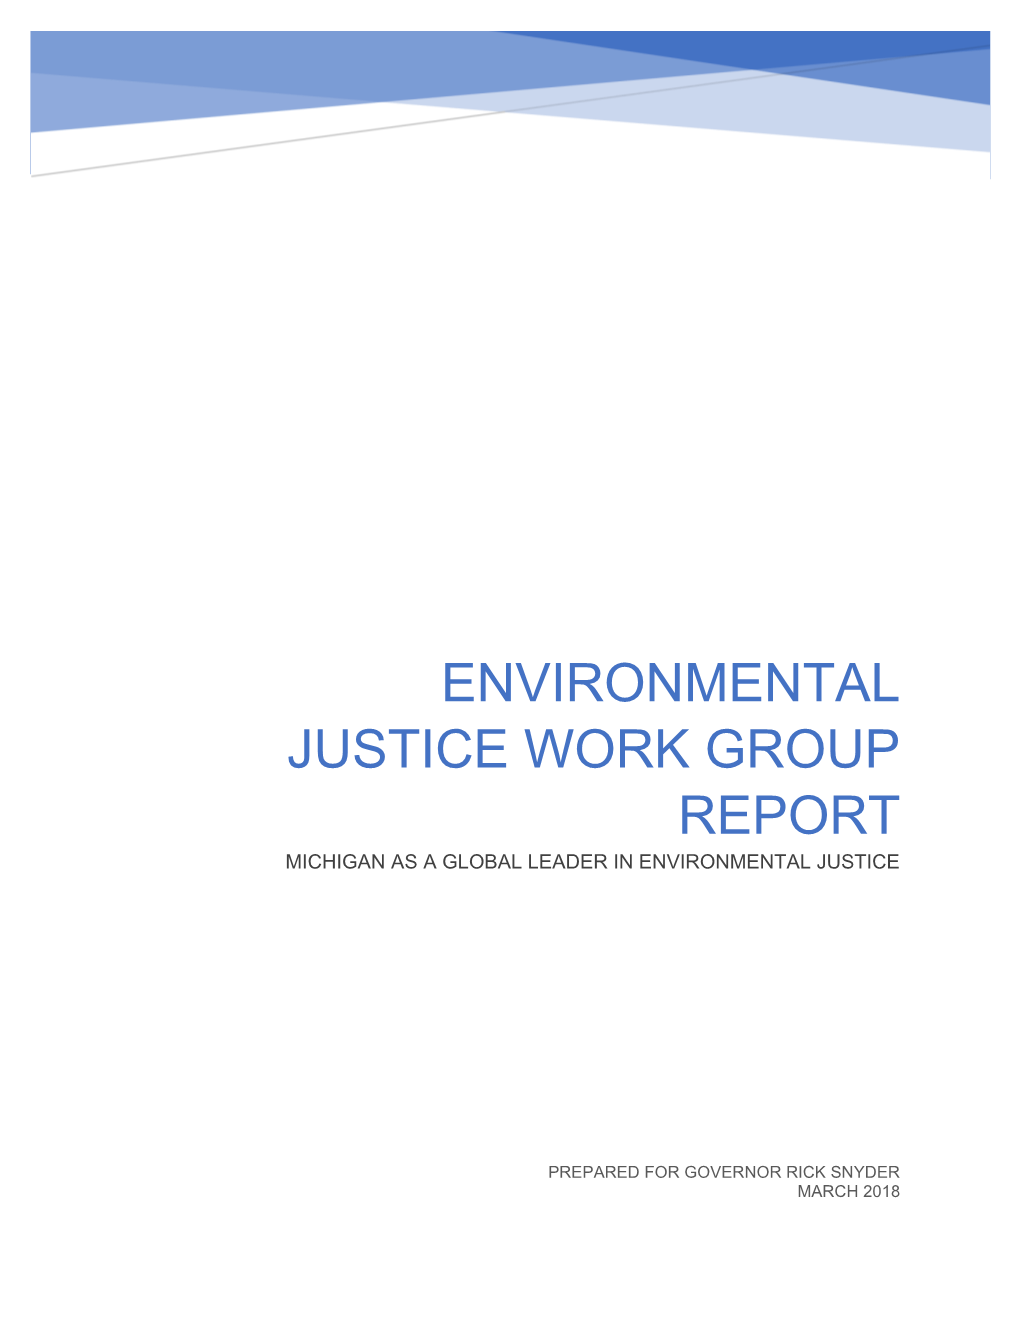 Environmental Justice Work Group Report Michigan As a Global Leader in Environmental Justice